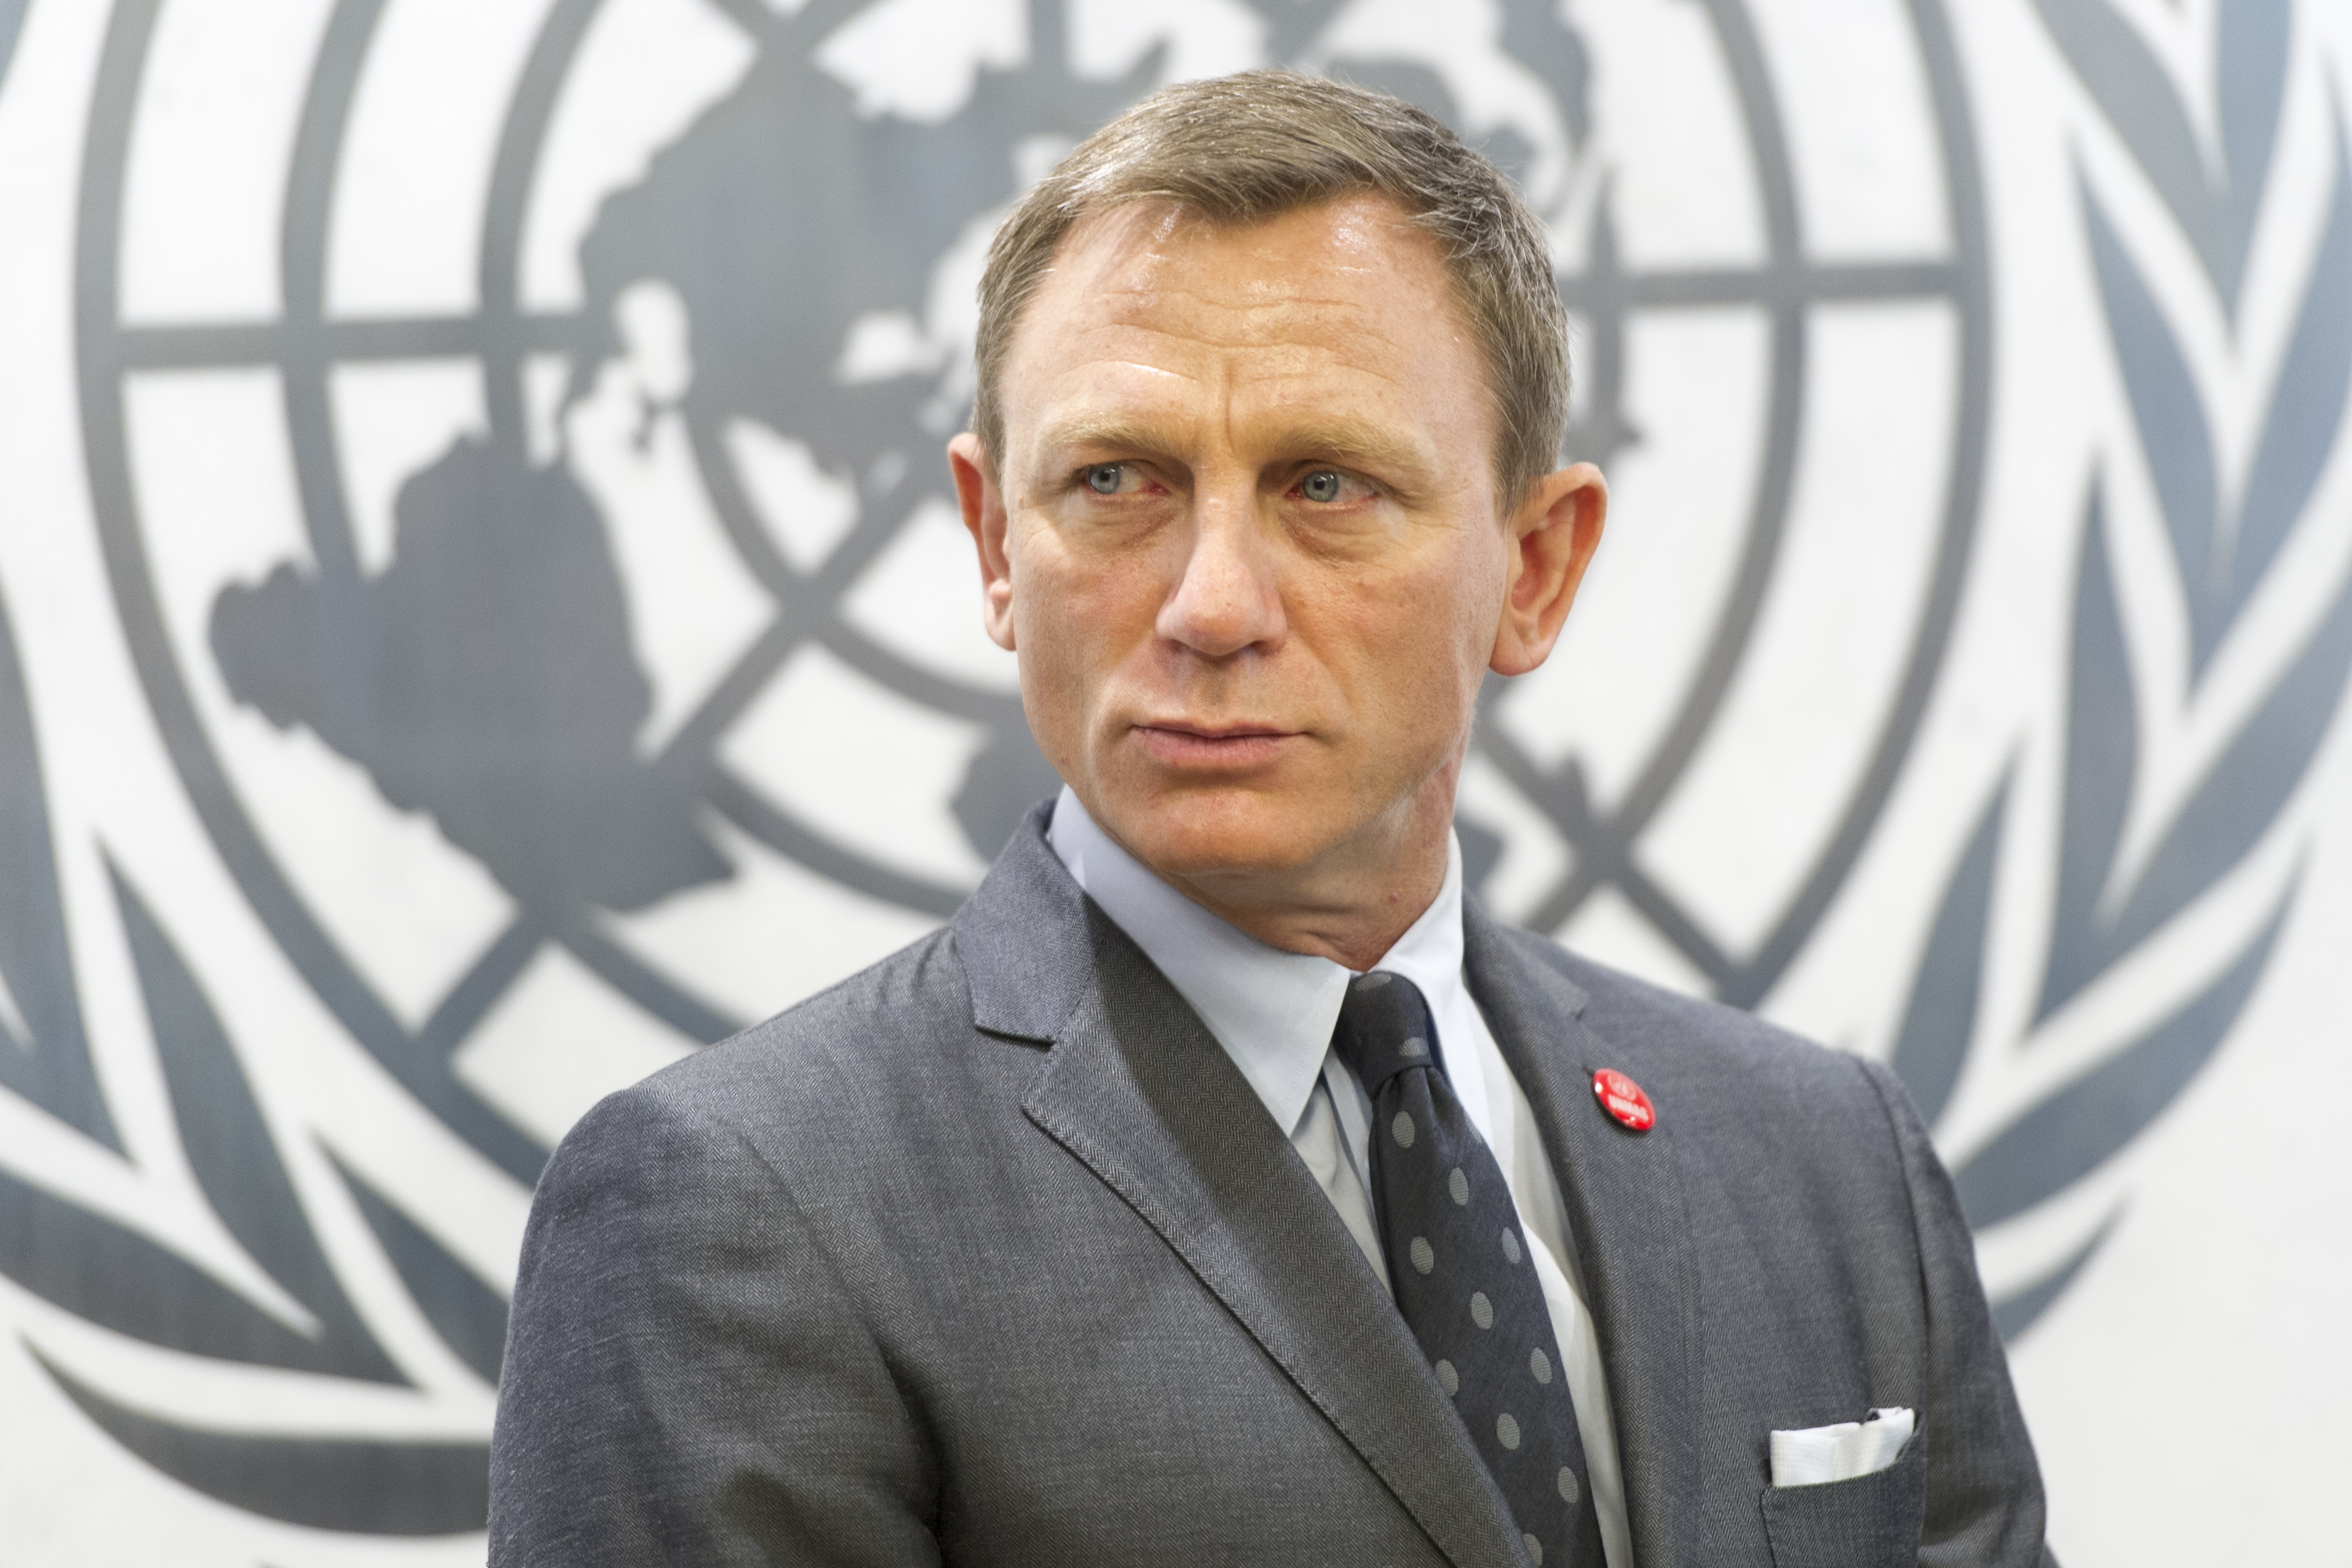 Designation of  Mr. Daniel Craig as the UN Global Advocate for the Elimination of  Mines and Explosive Hazards